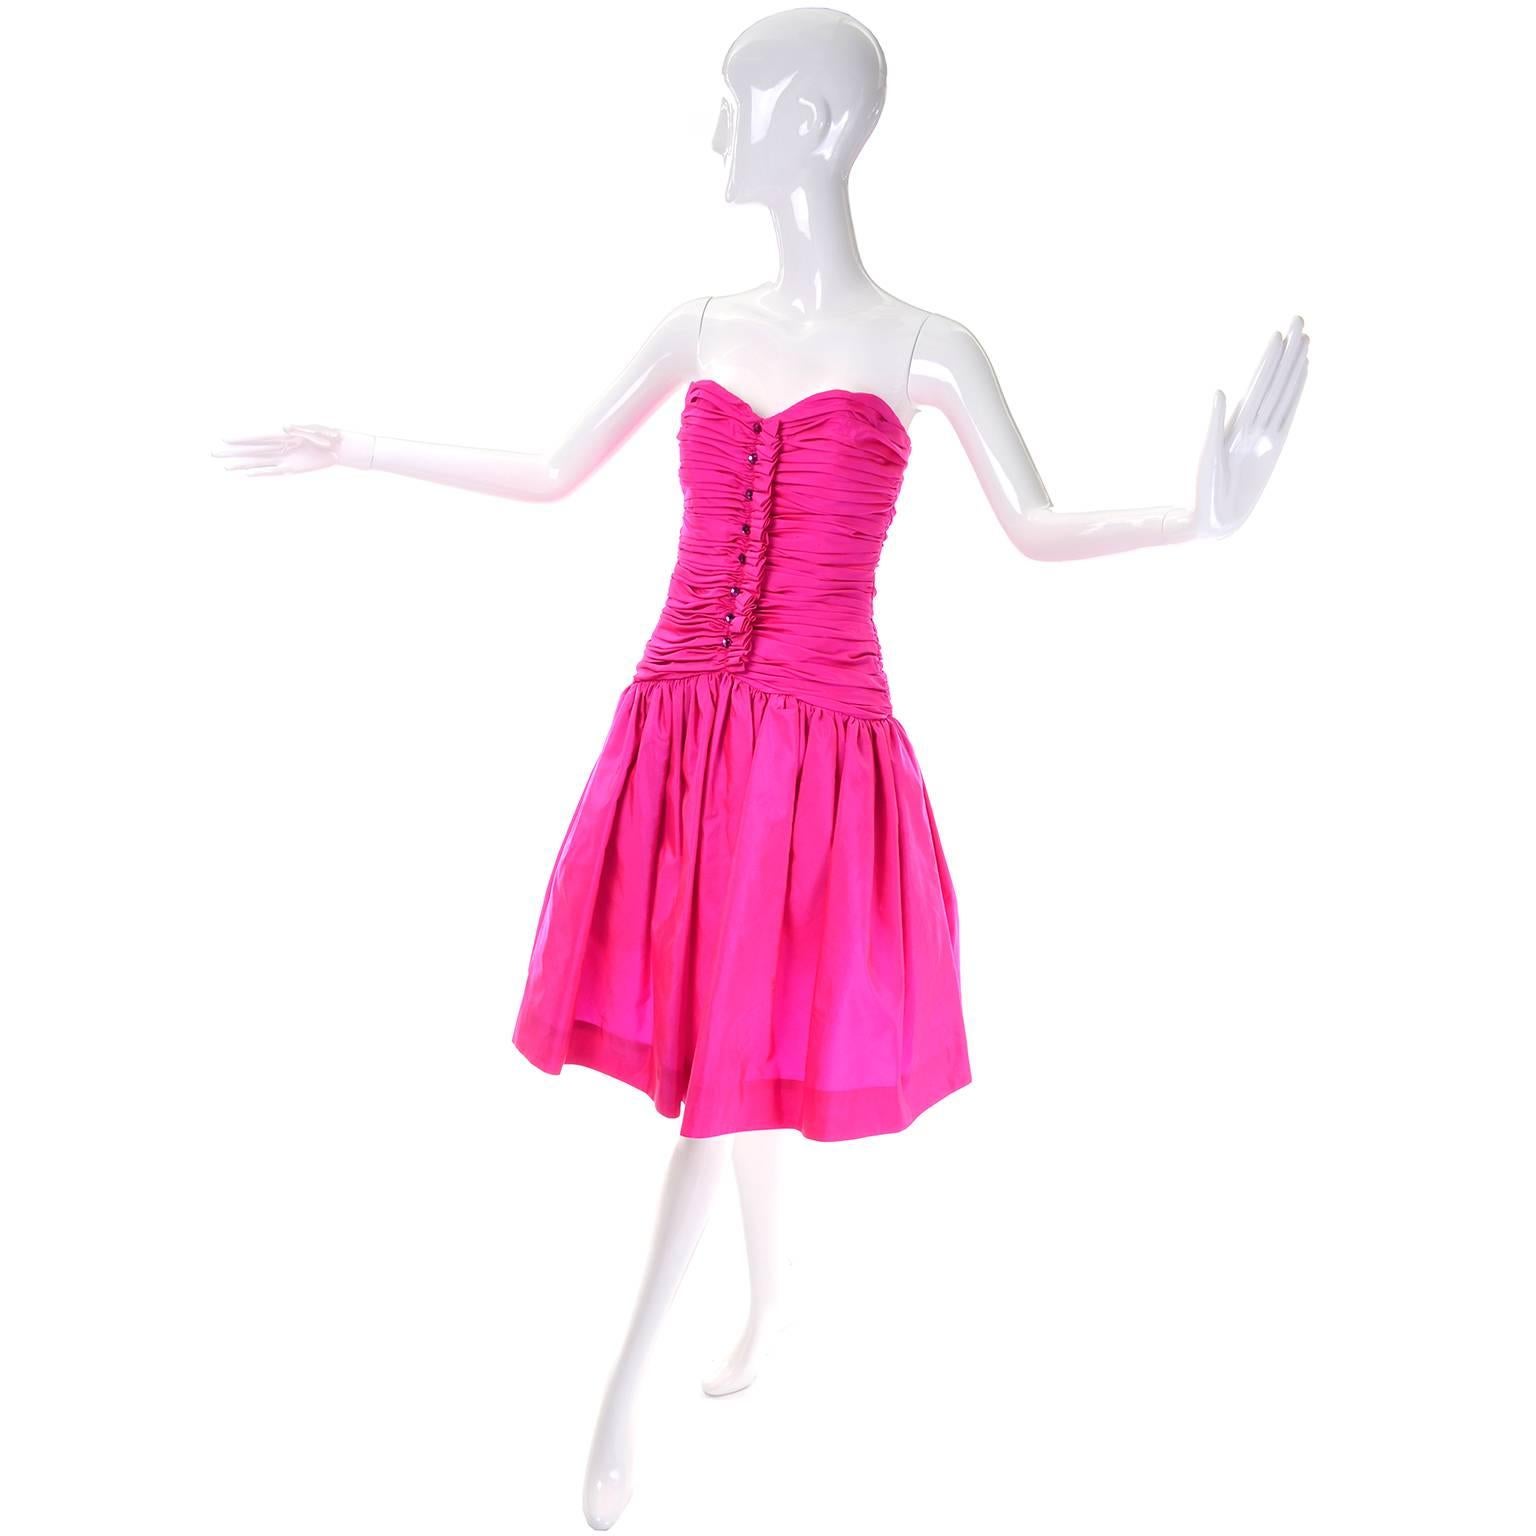 This is a show stopping vintage Victor Costa hot pink strapless dress with a rouched bodice and drop waist. Faceted faux gemstone glass buttons run up the front. There is a short crinoline under skirt and an even shorter tulle piece on top of that